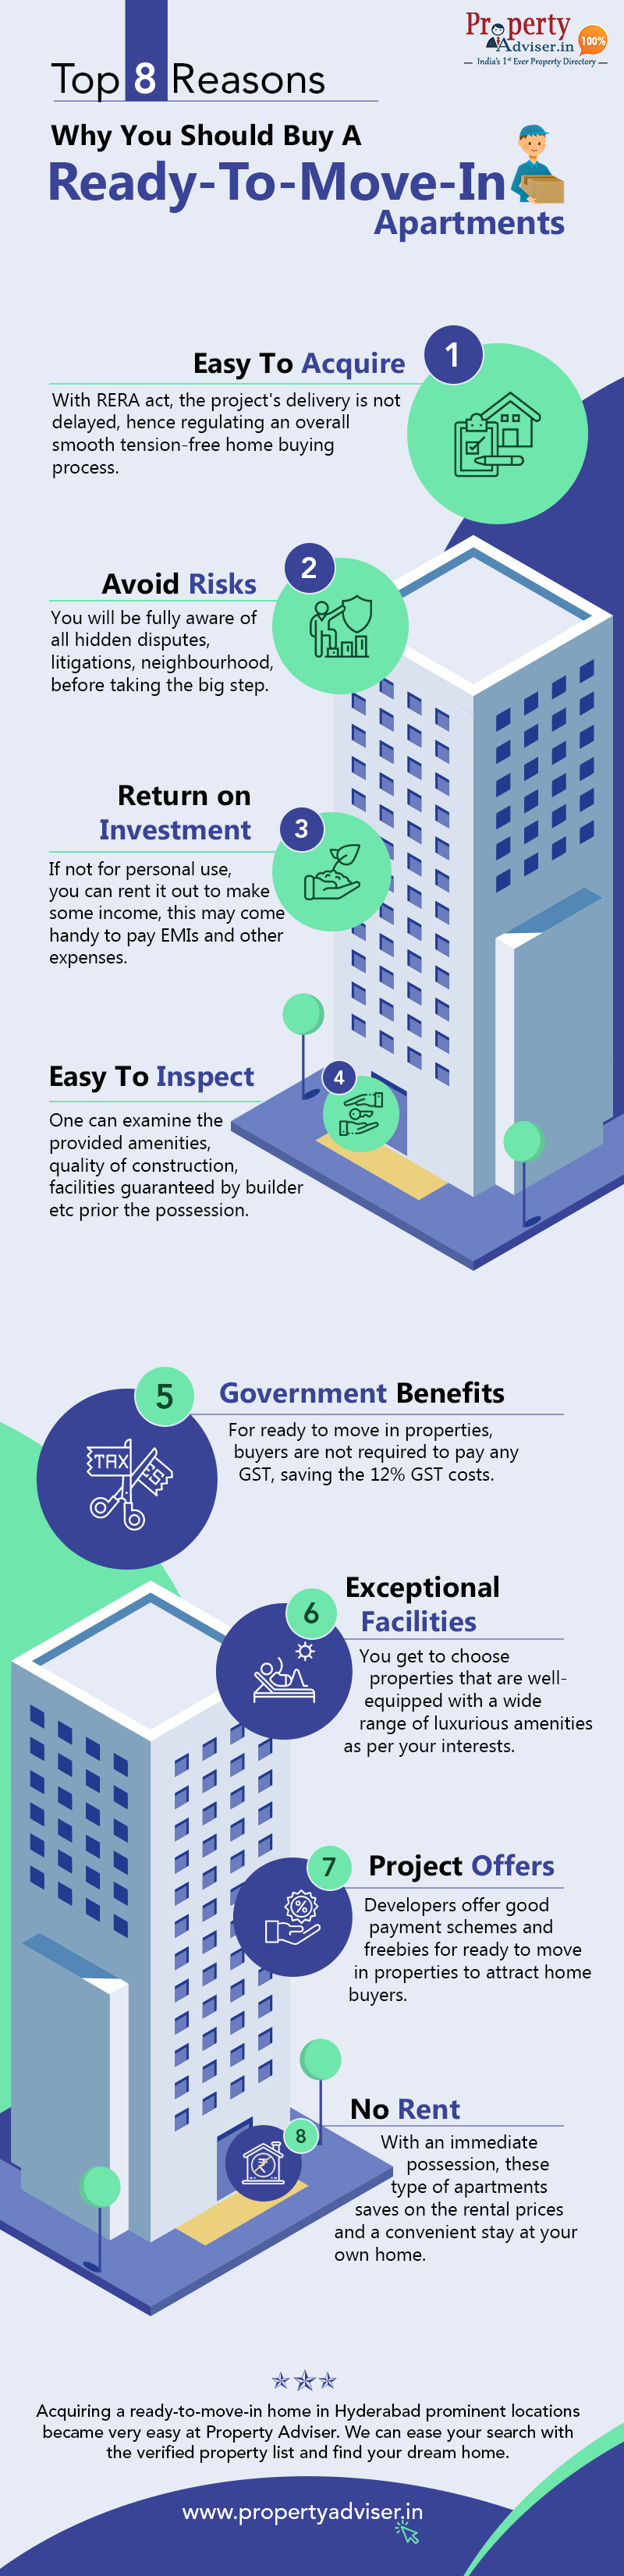 Infographic Top 8 Reasons to a Ready -To-Move Apartments